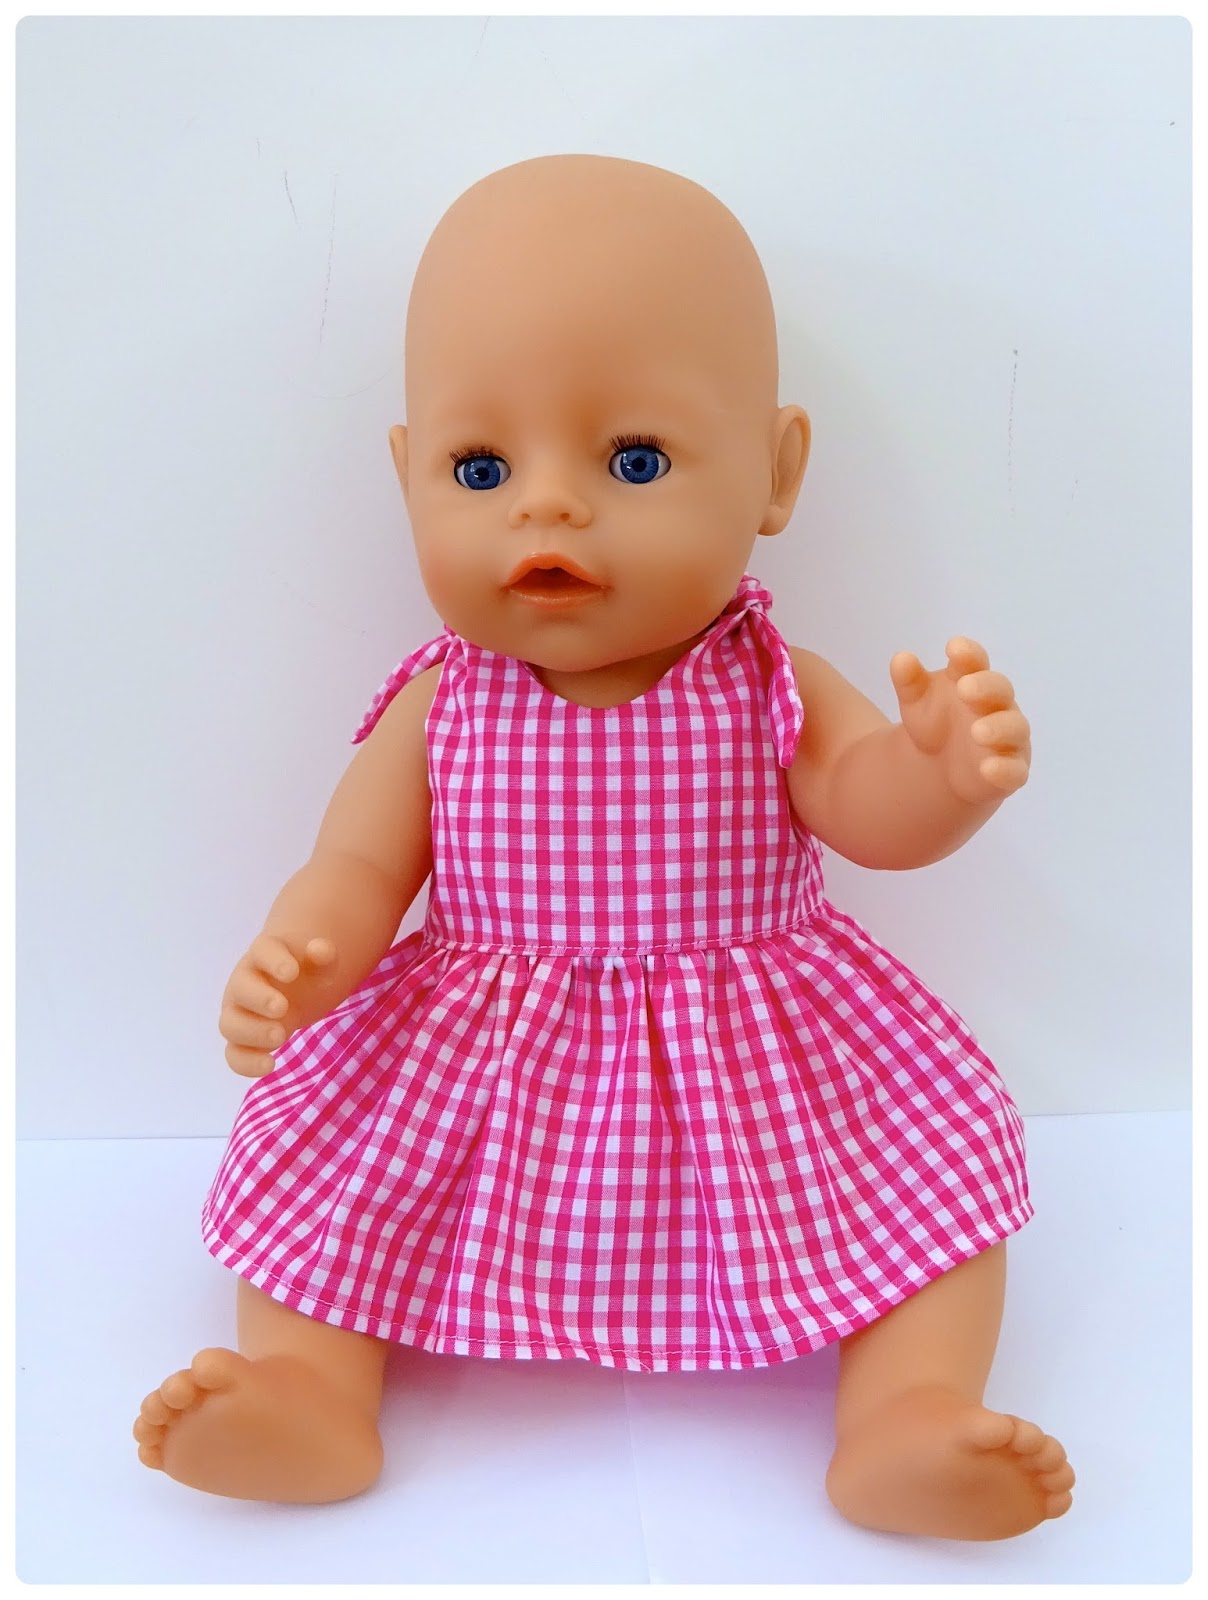 Doll Clothes Patterns by Valspierssews: Doll Style: The Baby Doll